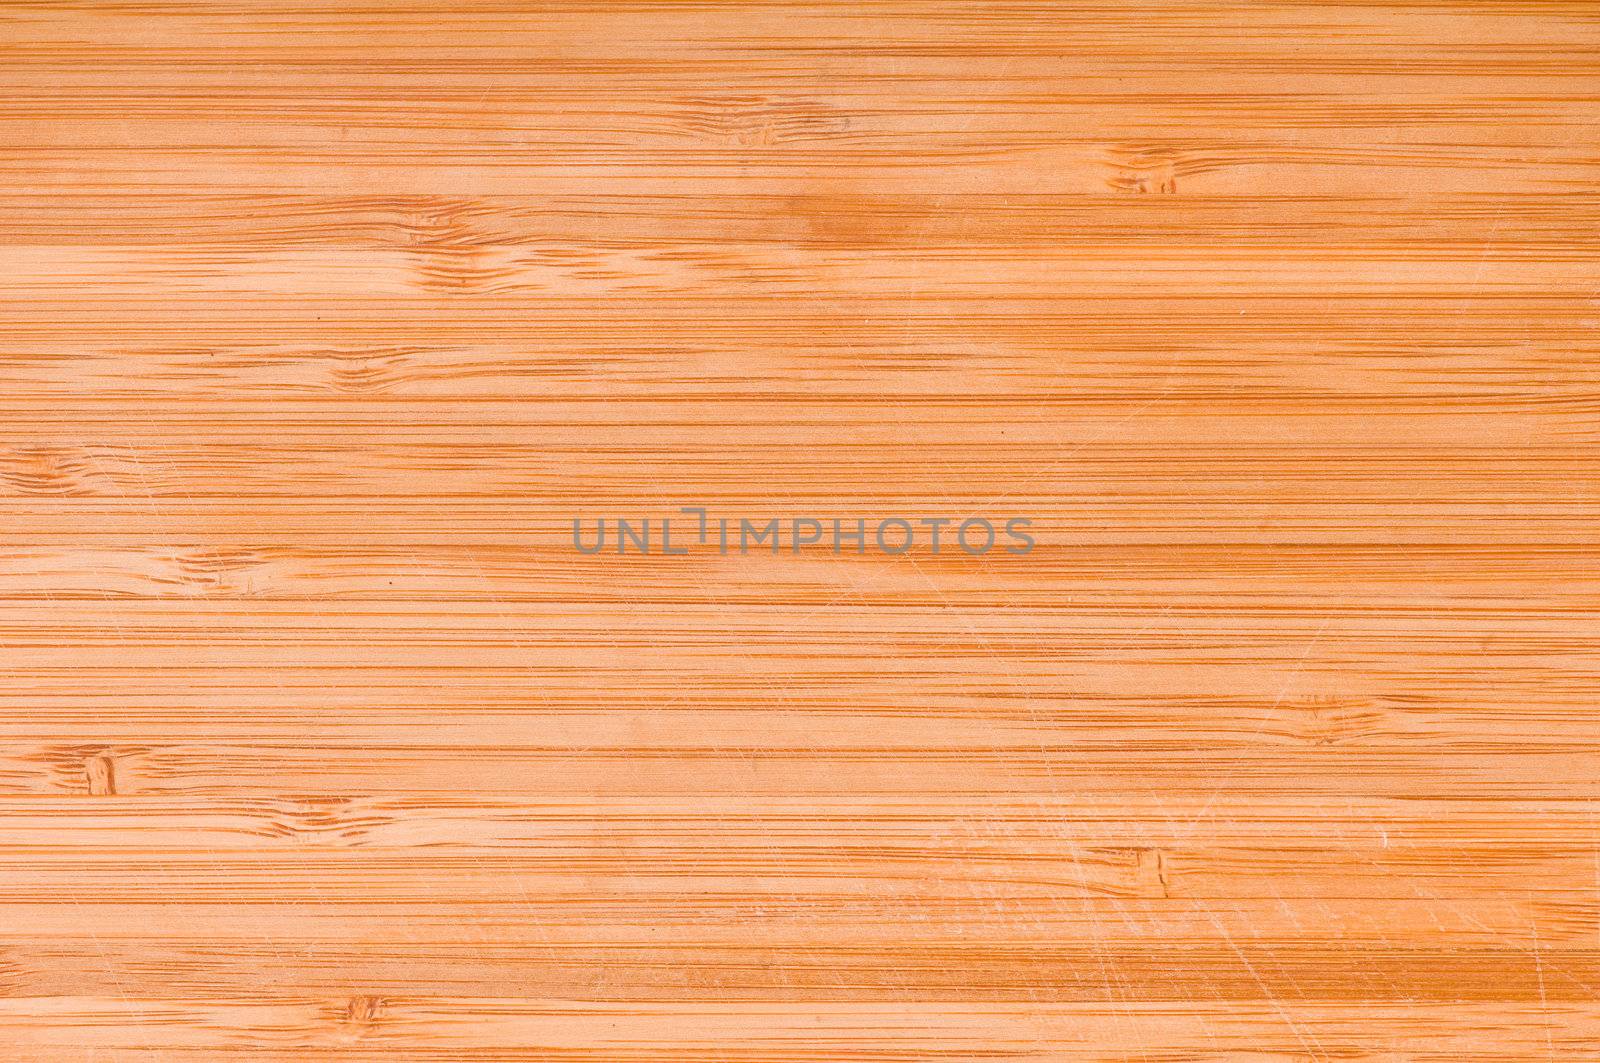 shooting close-up a wooden texture background